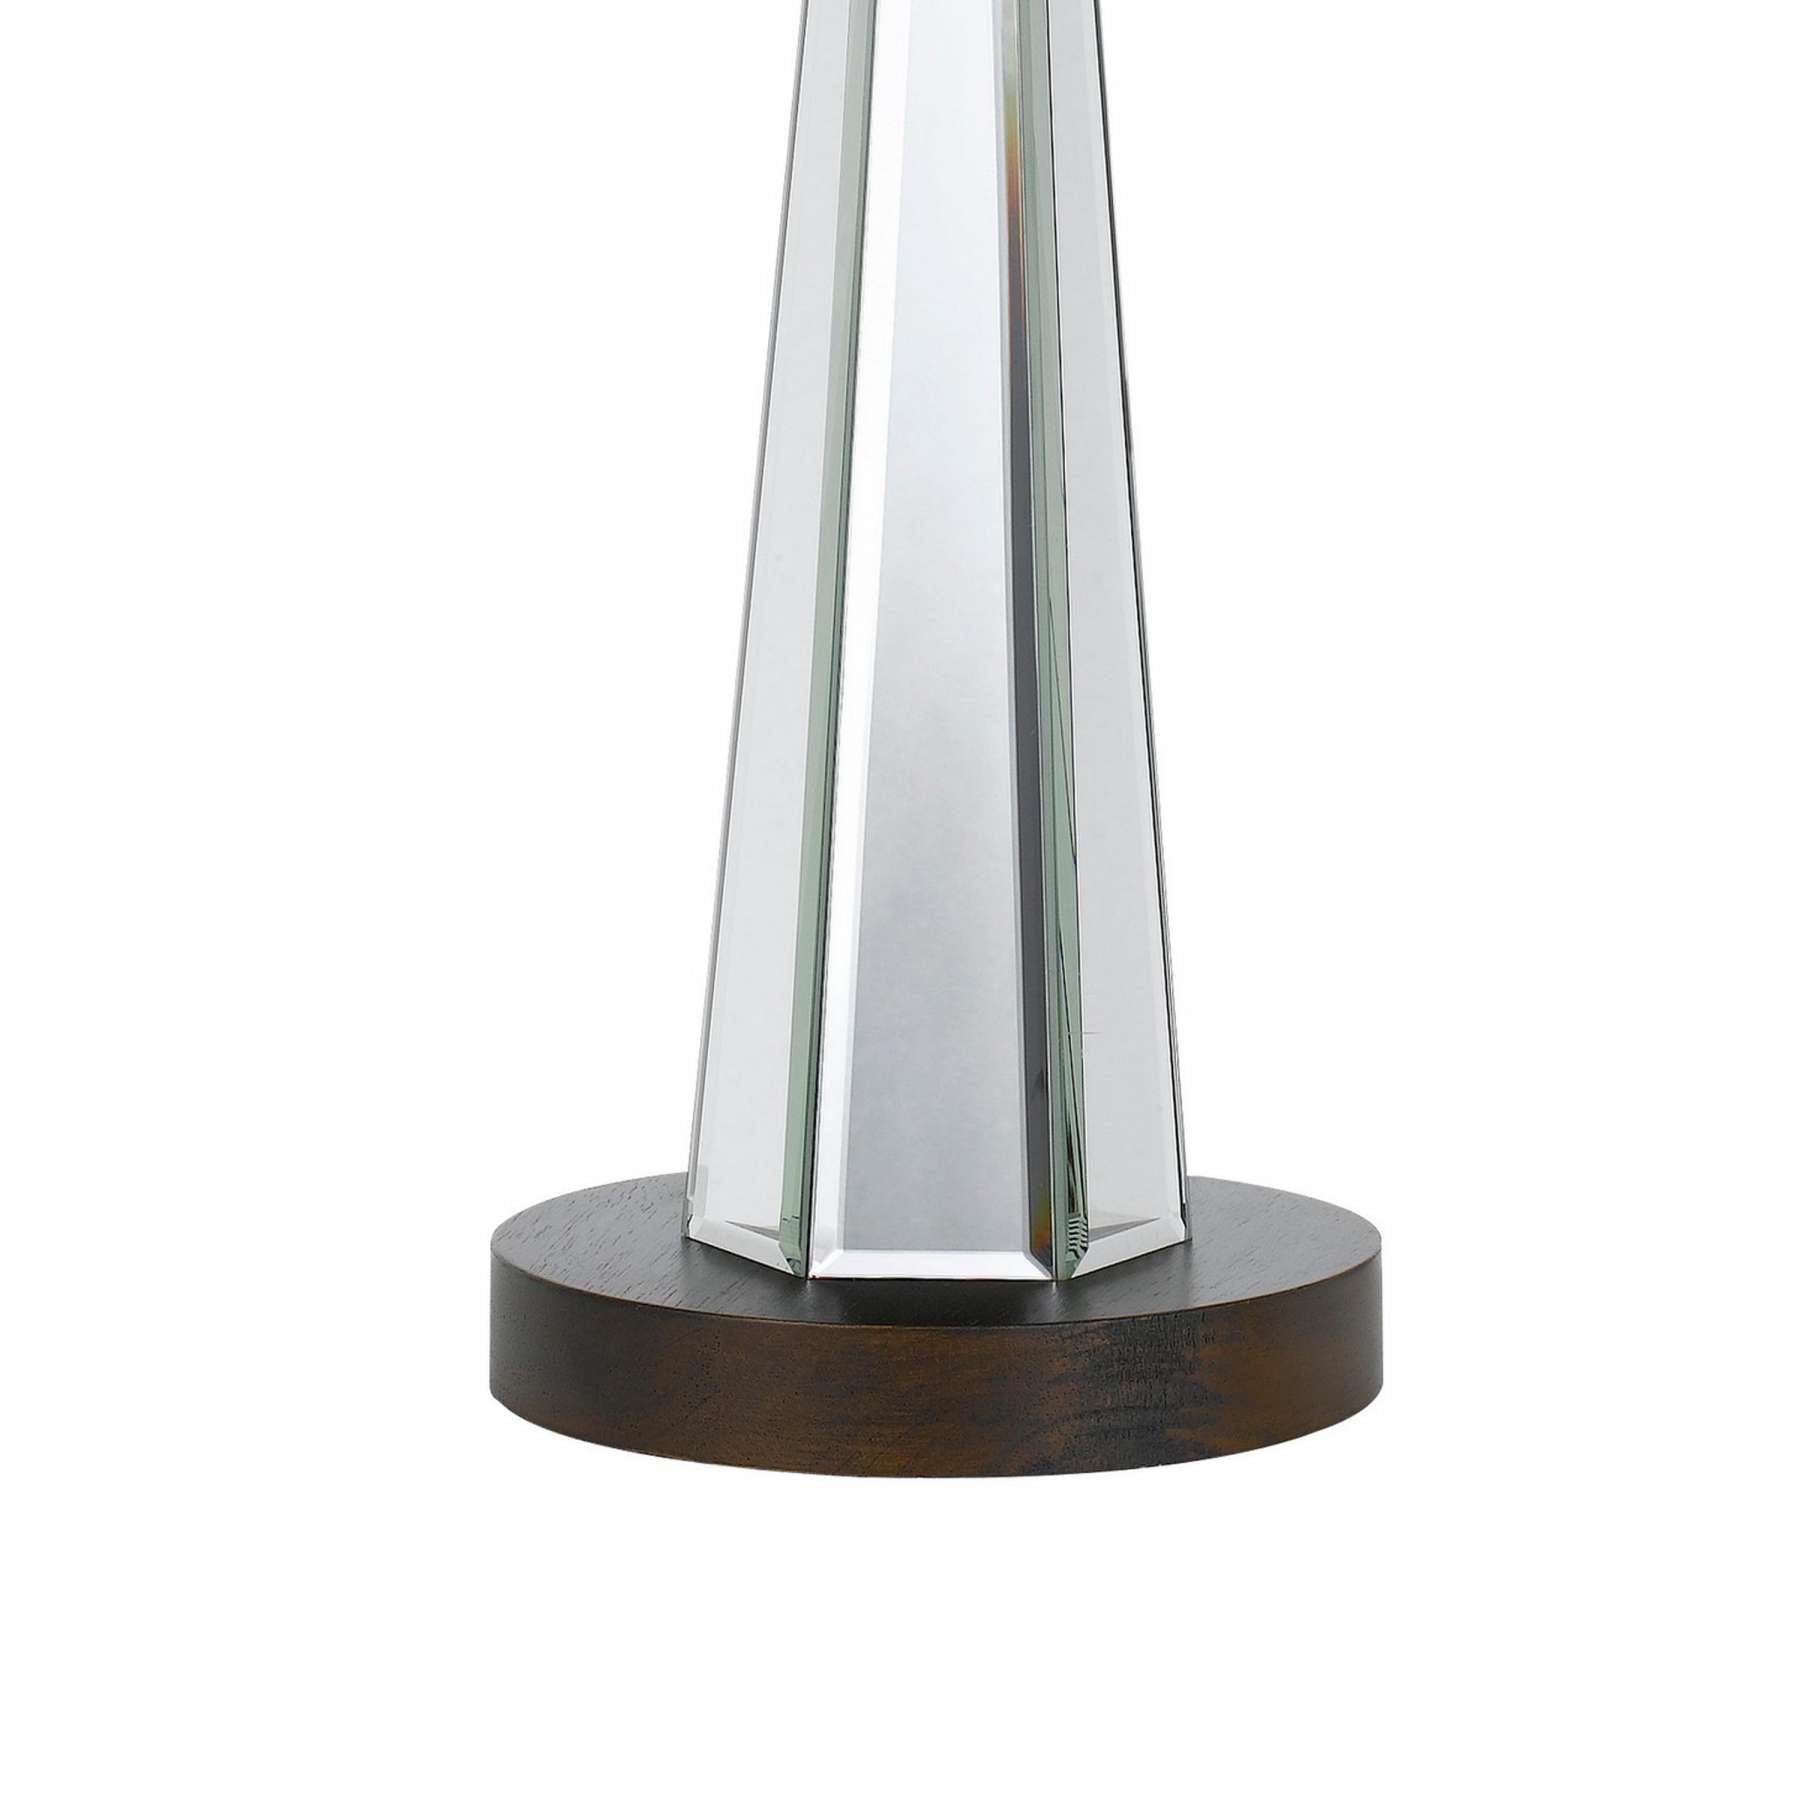 Fabric Shade Table Lamp With Faceted Mirror And Wooden Base, White By Benzara